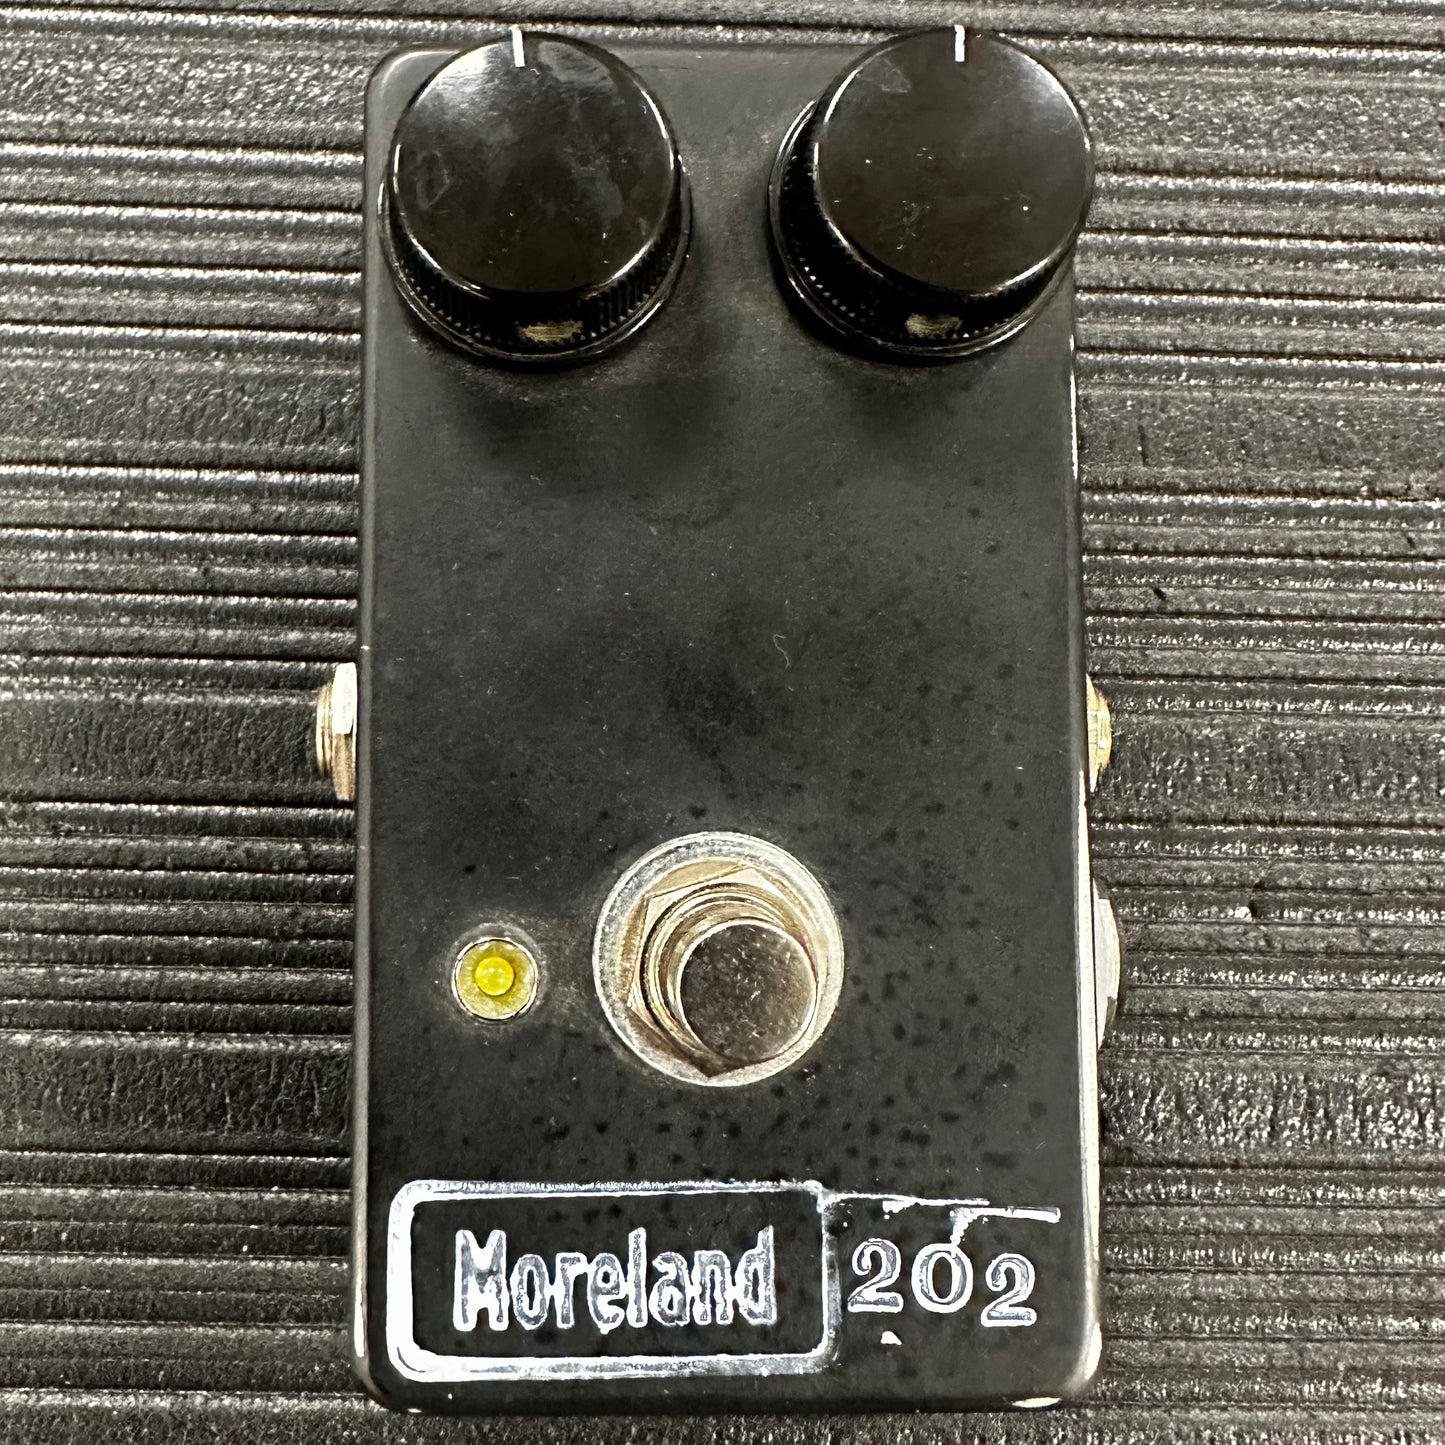 Top down of Used Moreland Magnetics 202 Distortion Pedal #5 of 5 TSS2813.